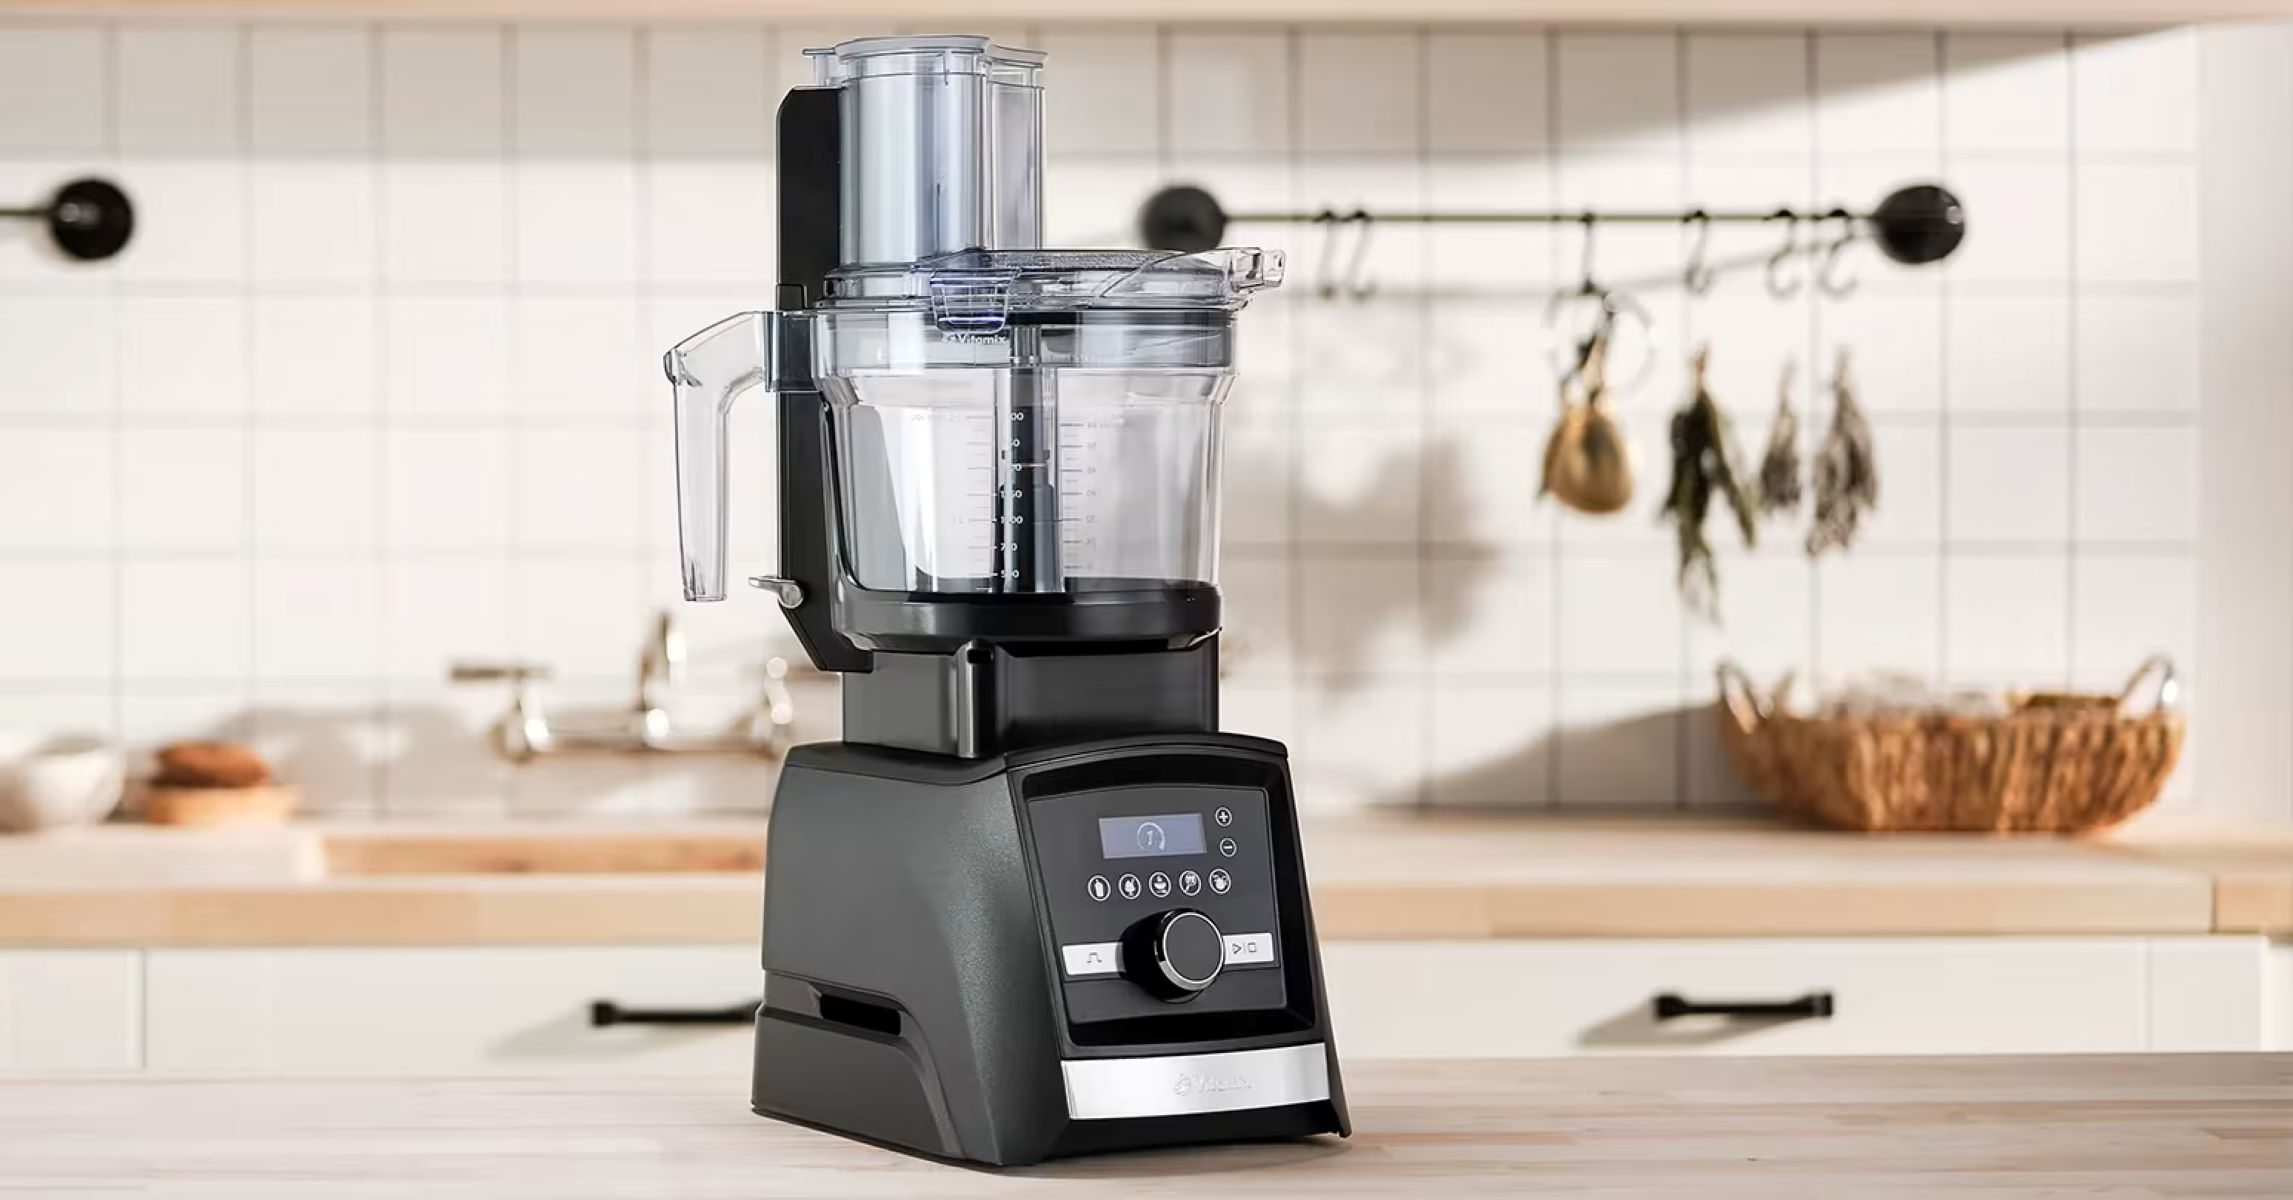 How to Clean a Vitamix? Every Hack and Tip You Need to Know